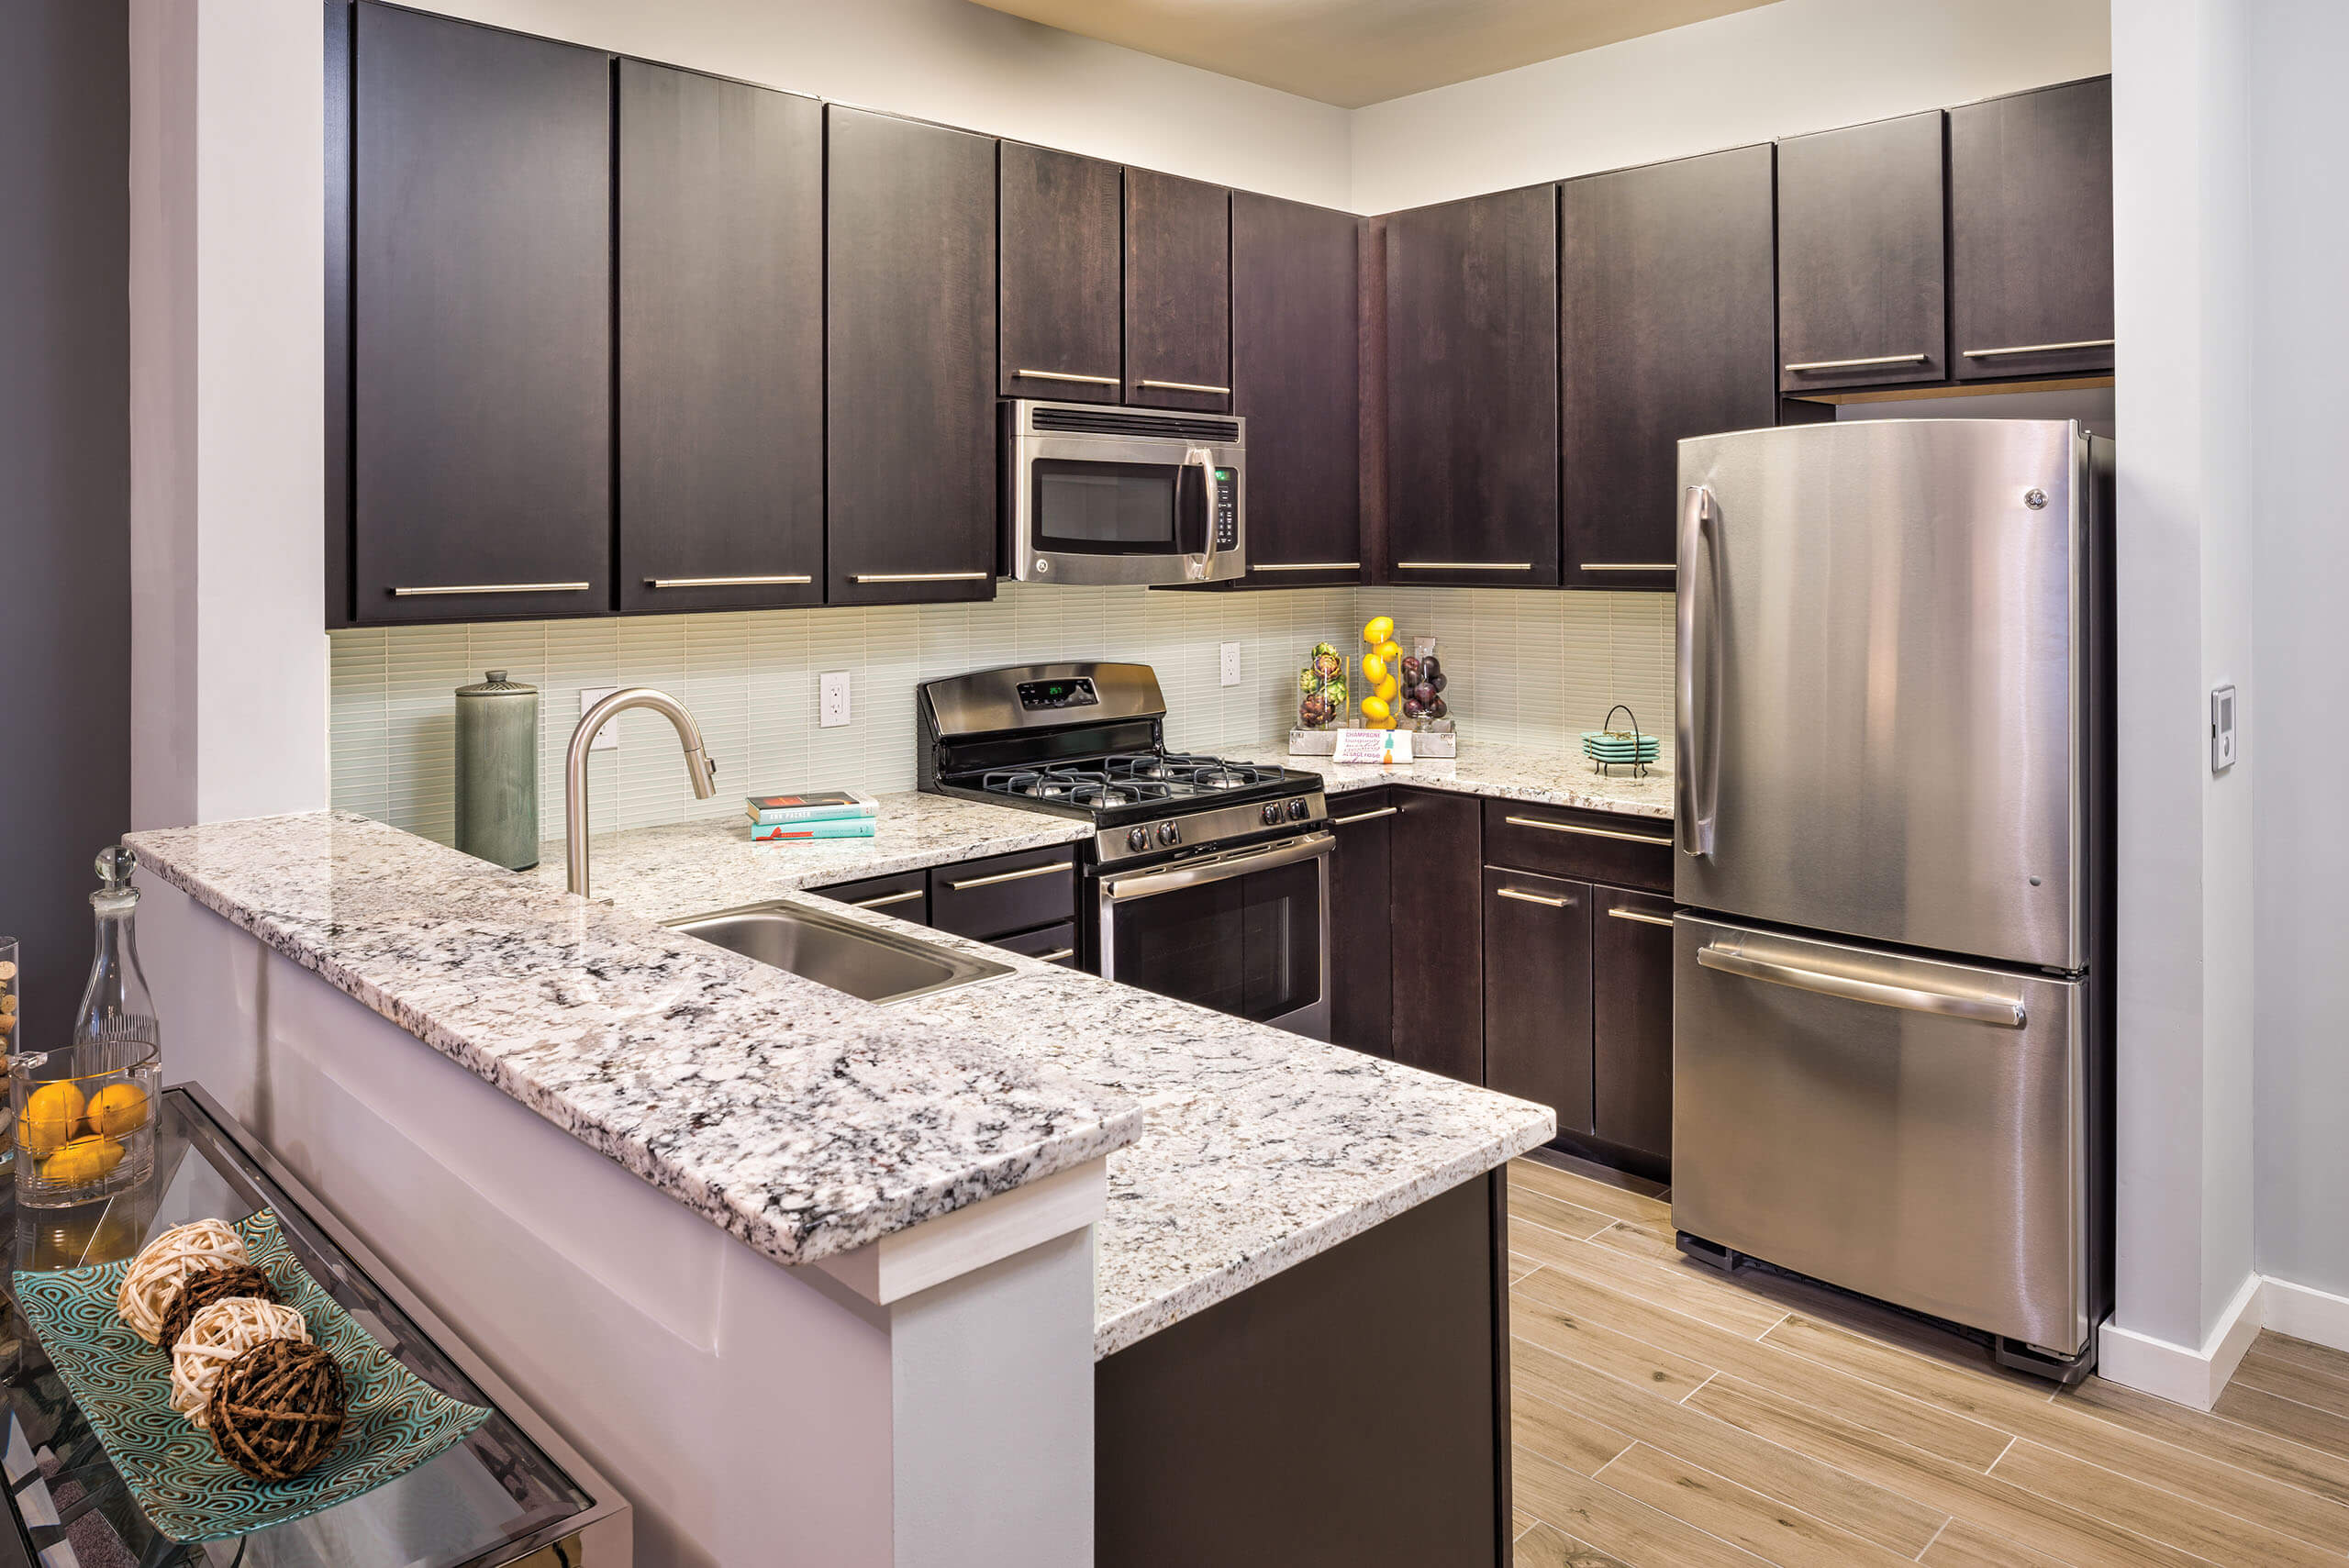 Gourmet kitchen with stainless steel appliances, dark cabinetry, and granite countertops